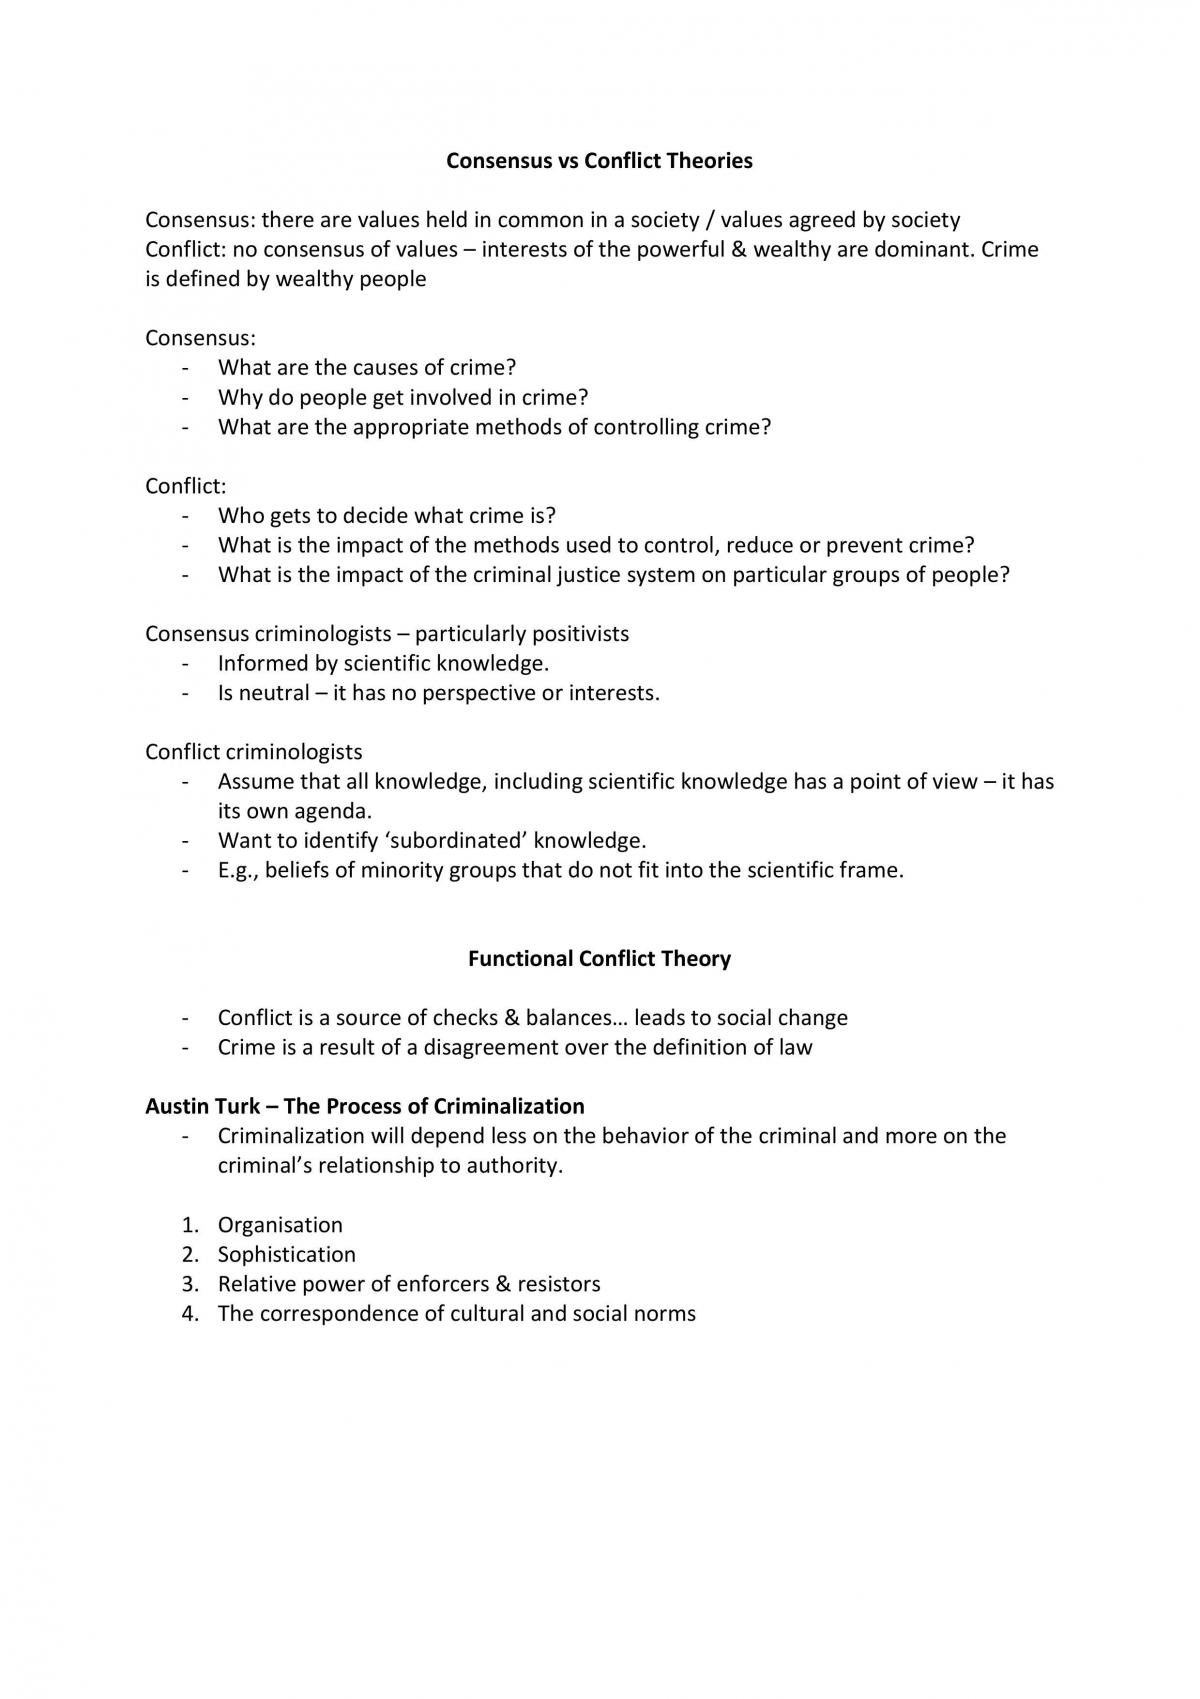 CRIM1000 Study Notes - Page 20